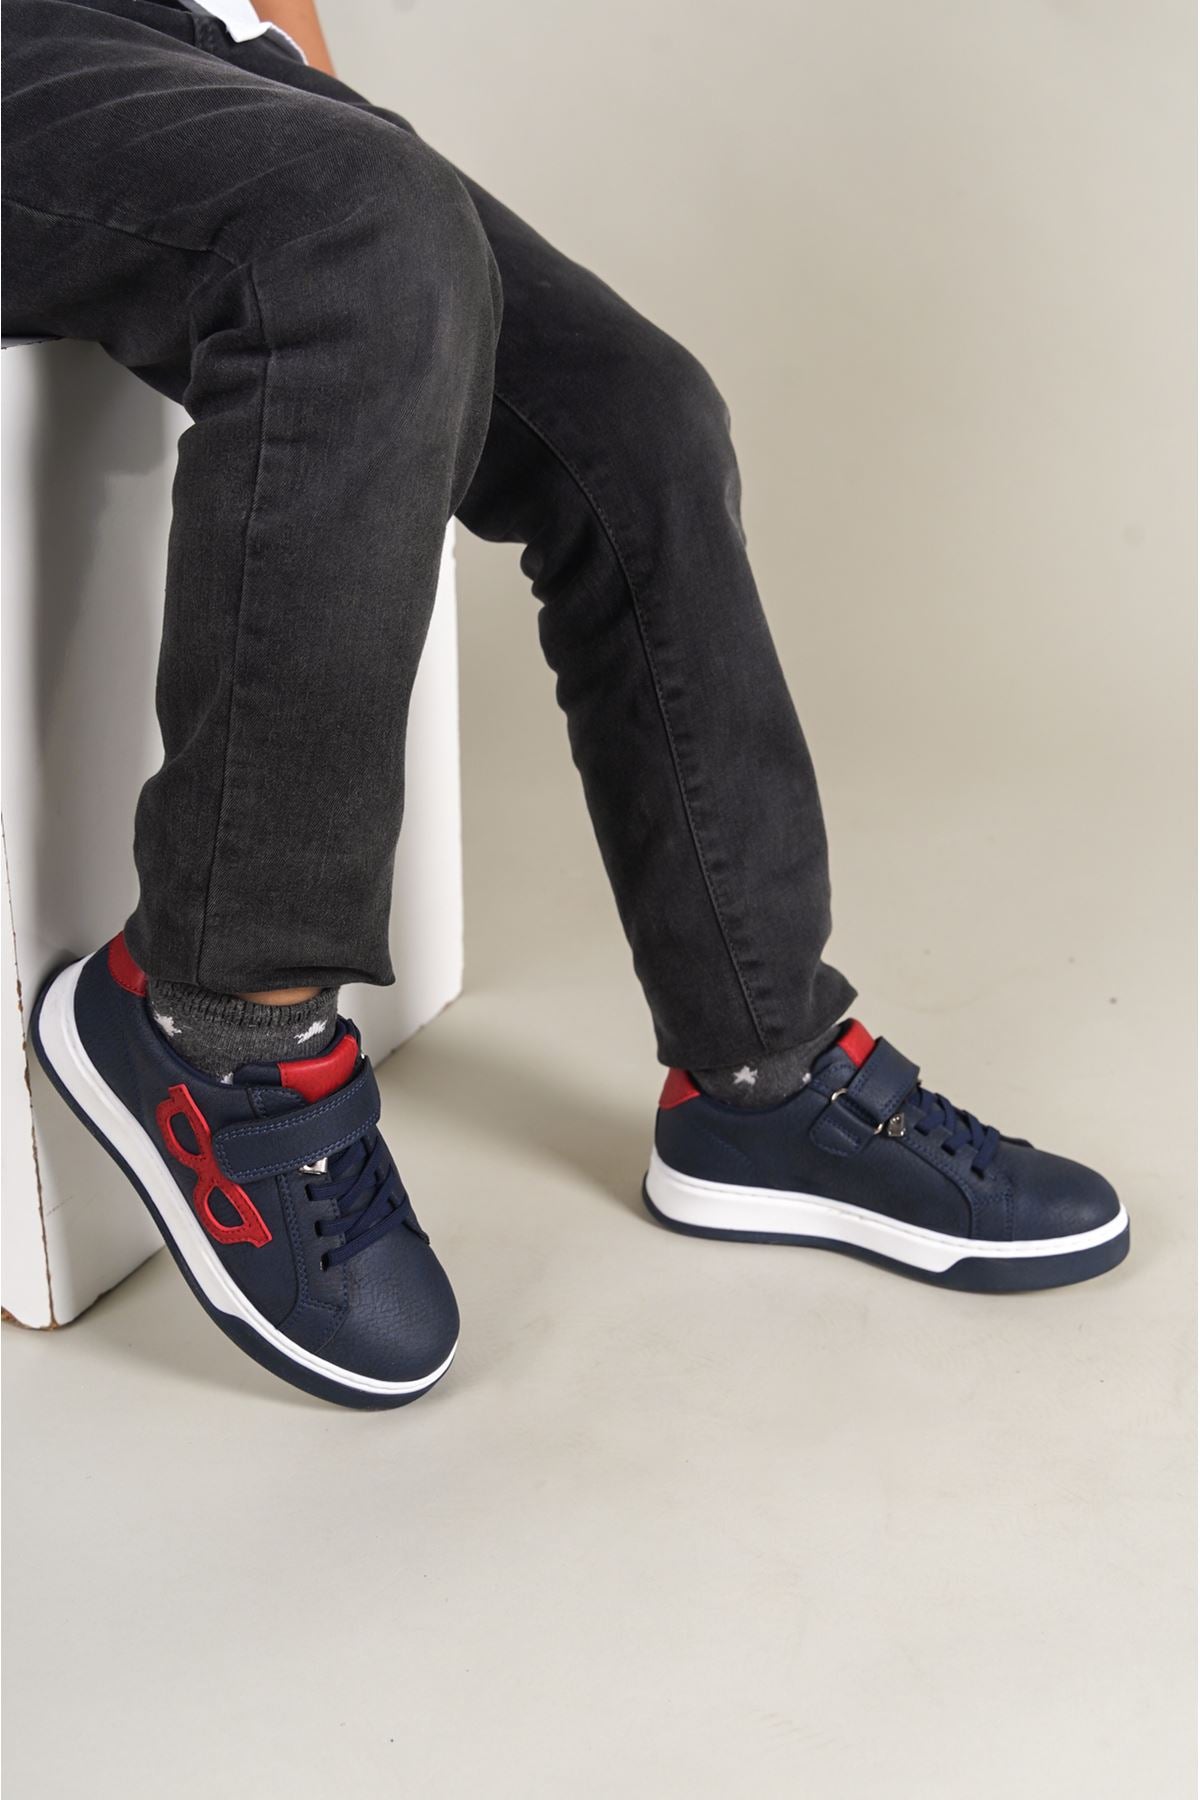 1011 Glasses-X Kids Shoes Navy Blue Red White